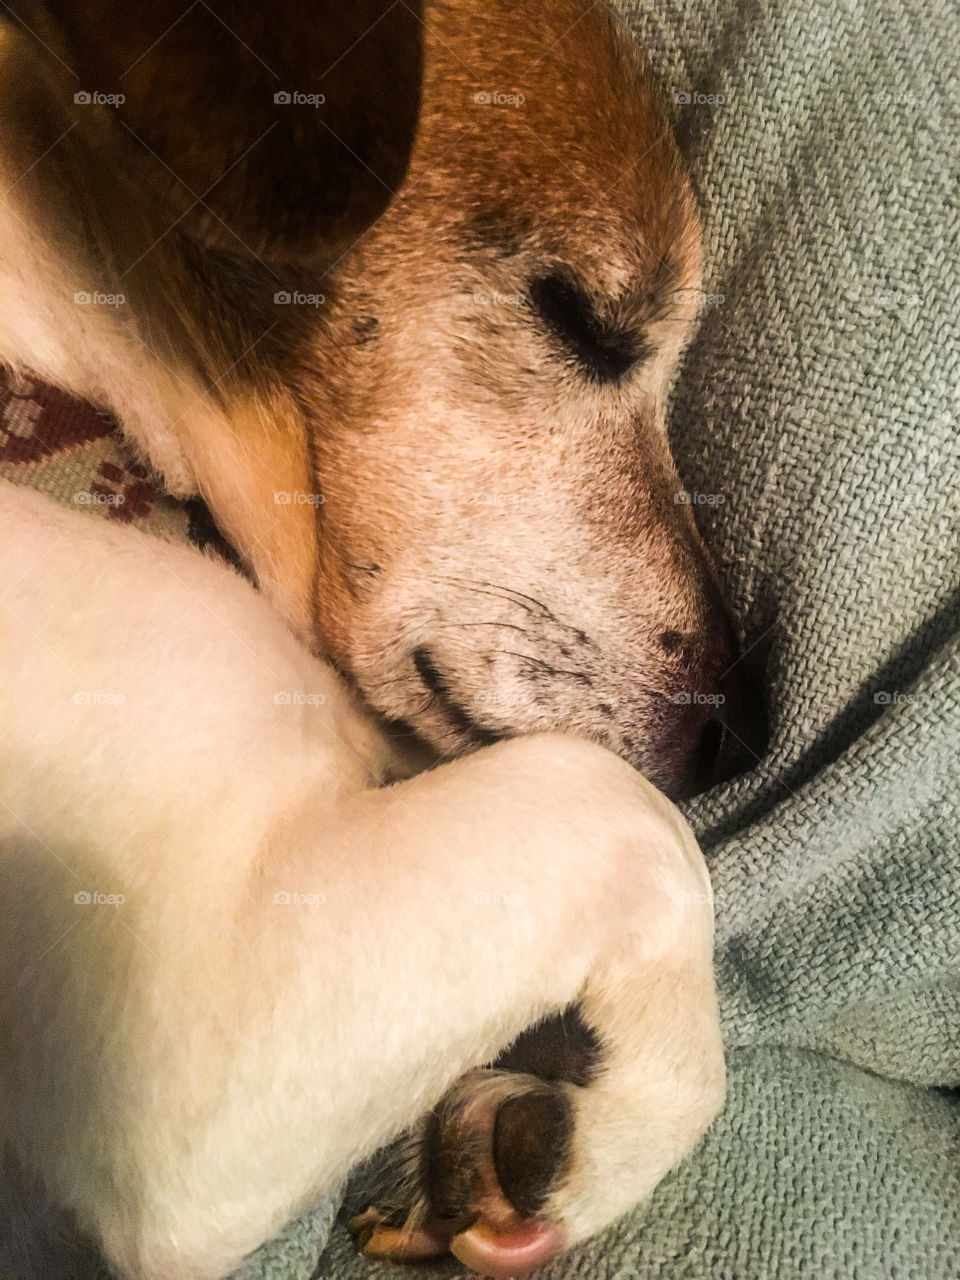 Thirteen year-old Jack Russell named Bean lost in blissful dreams full of youth, squirrels, and meat balls. 